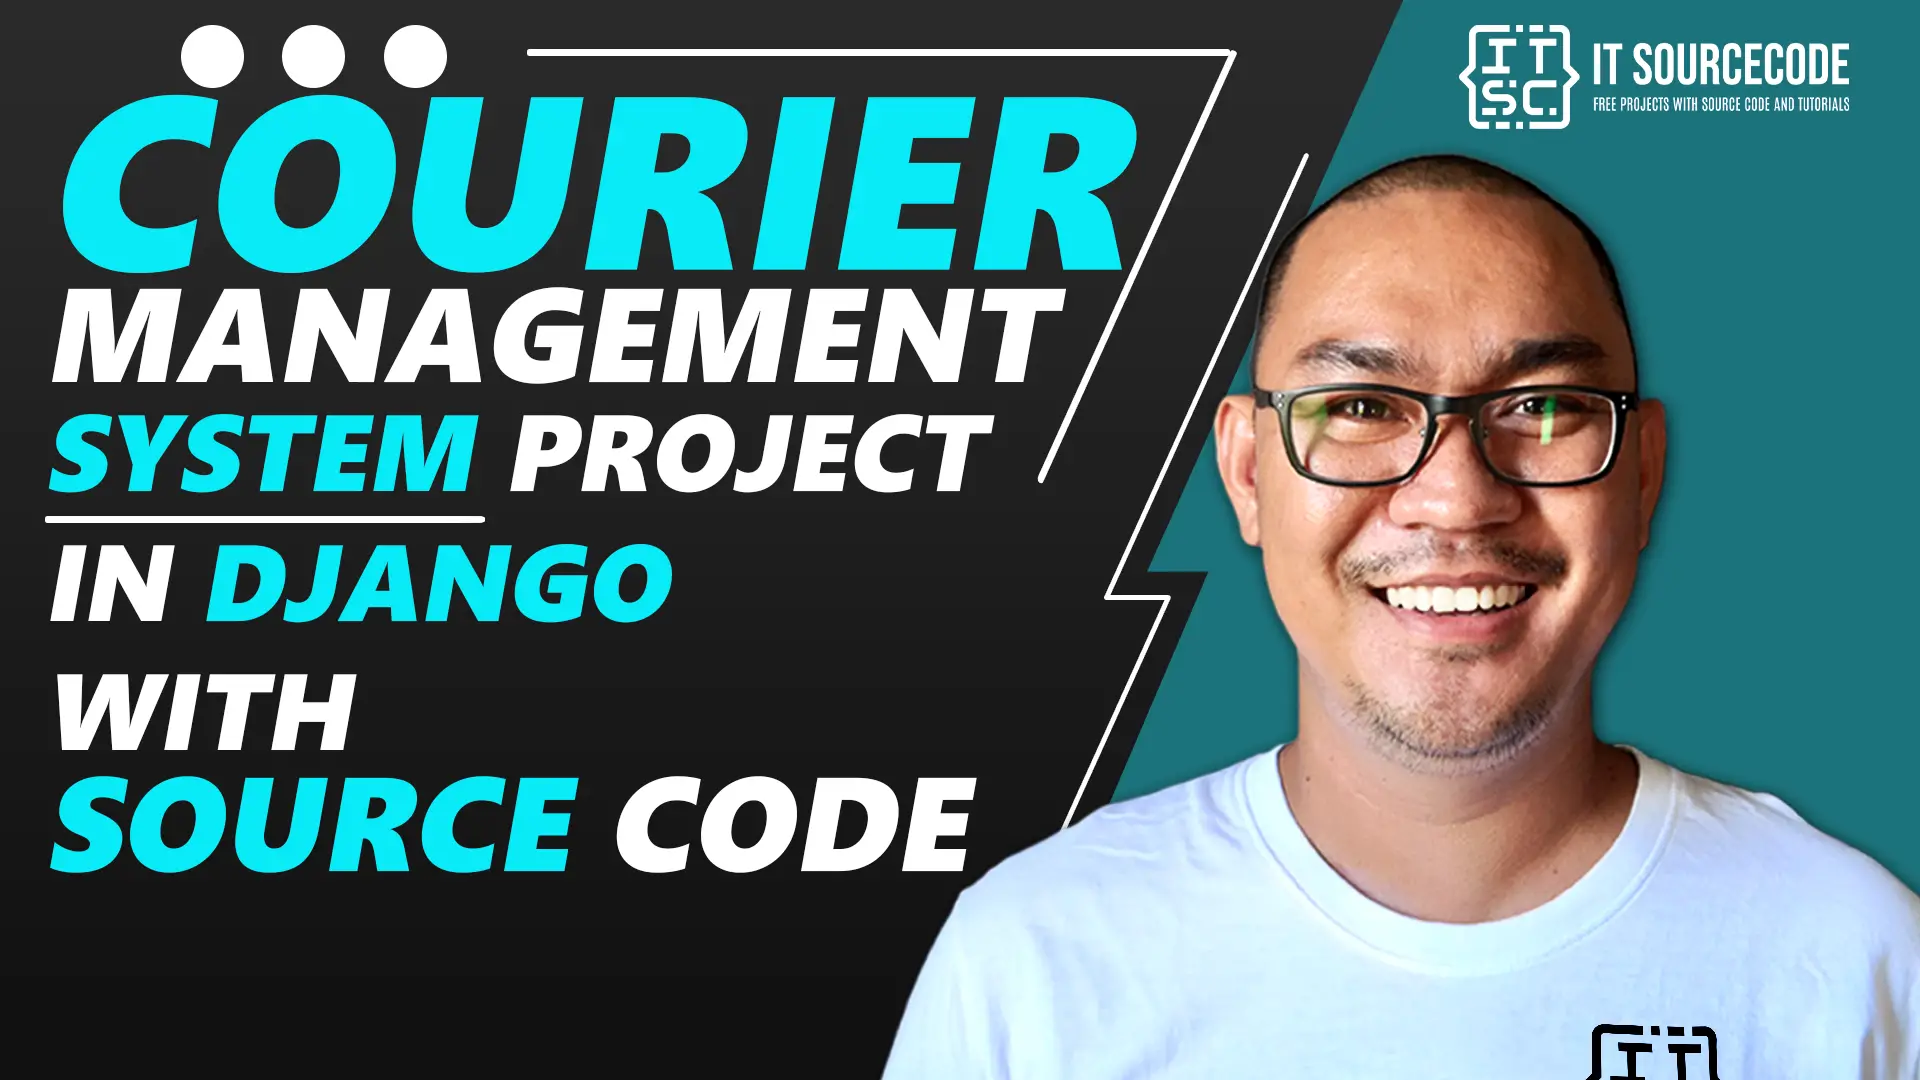 Courier Management System Project in Django